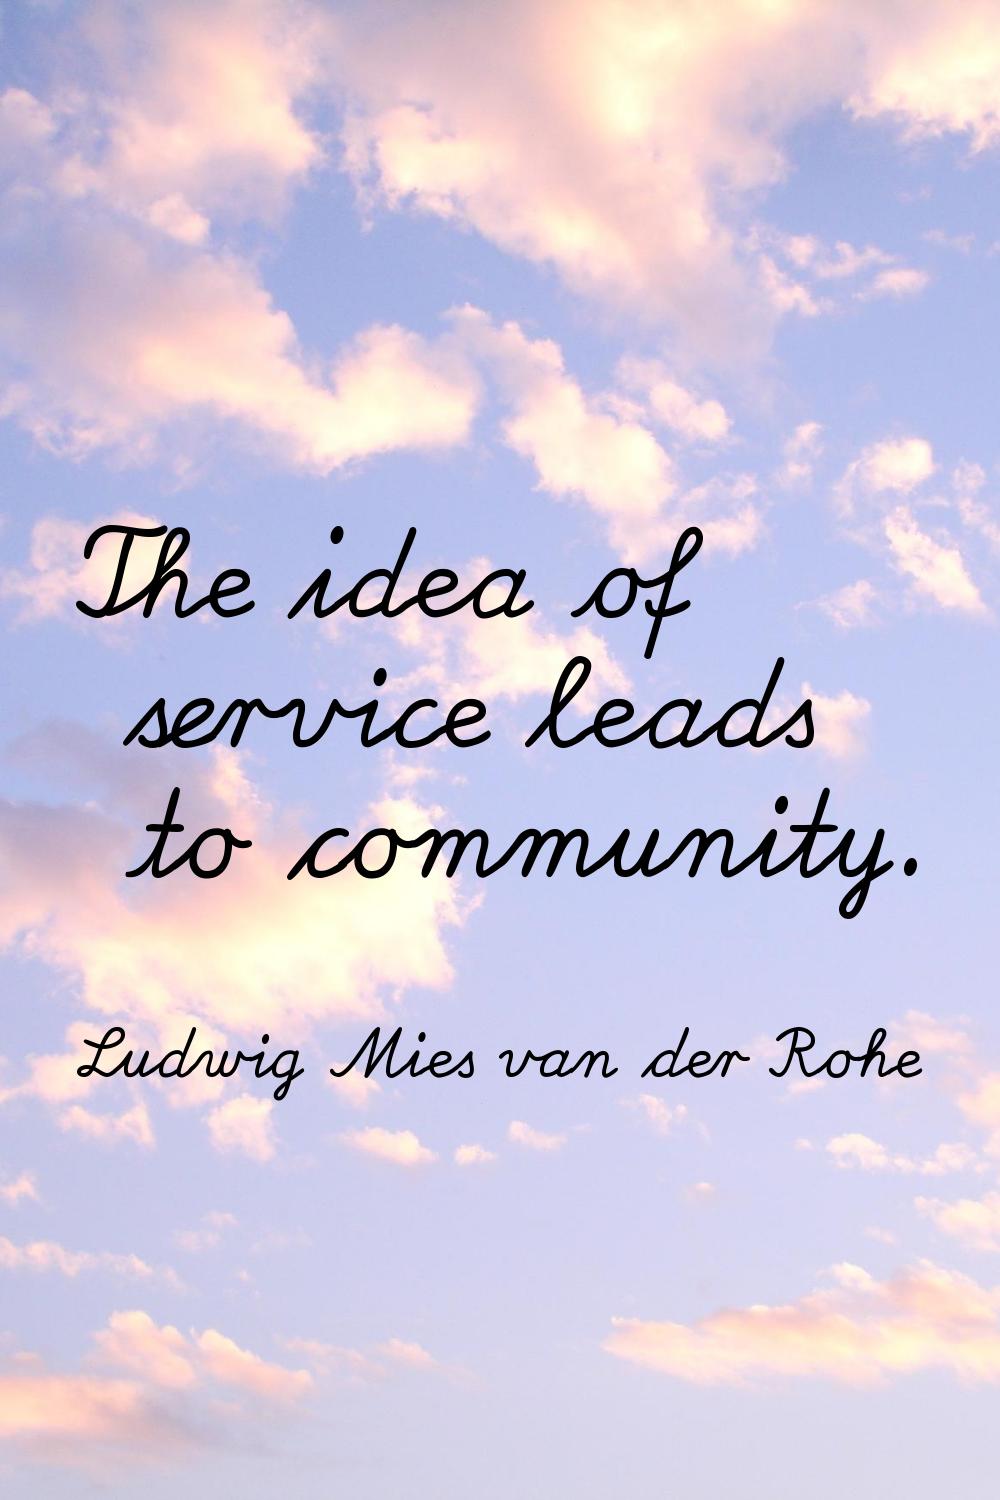 The idea of service leads to community.